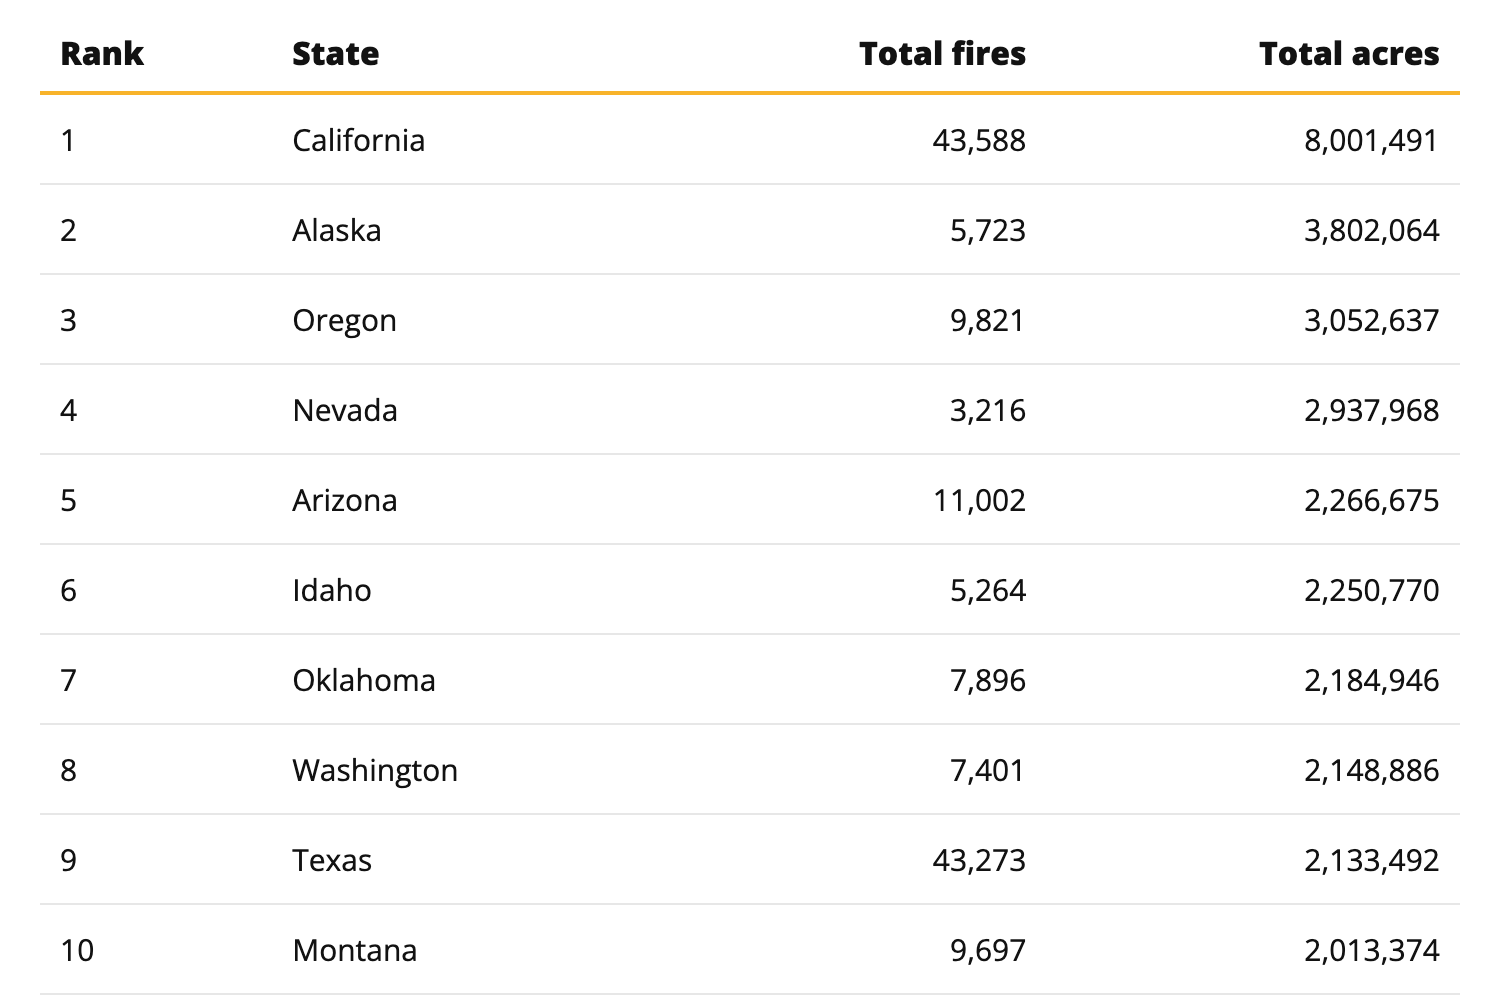 Top ten states by acres burned